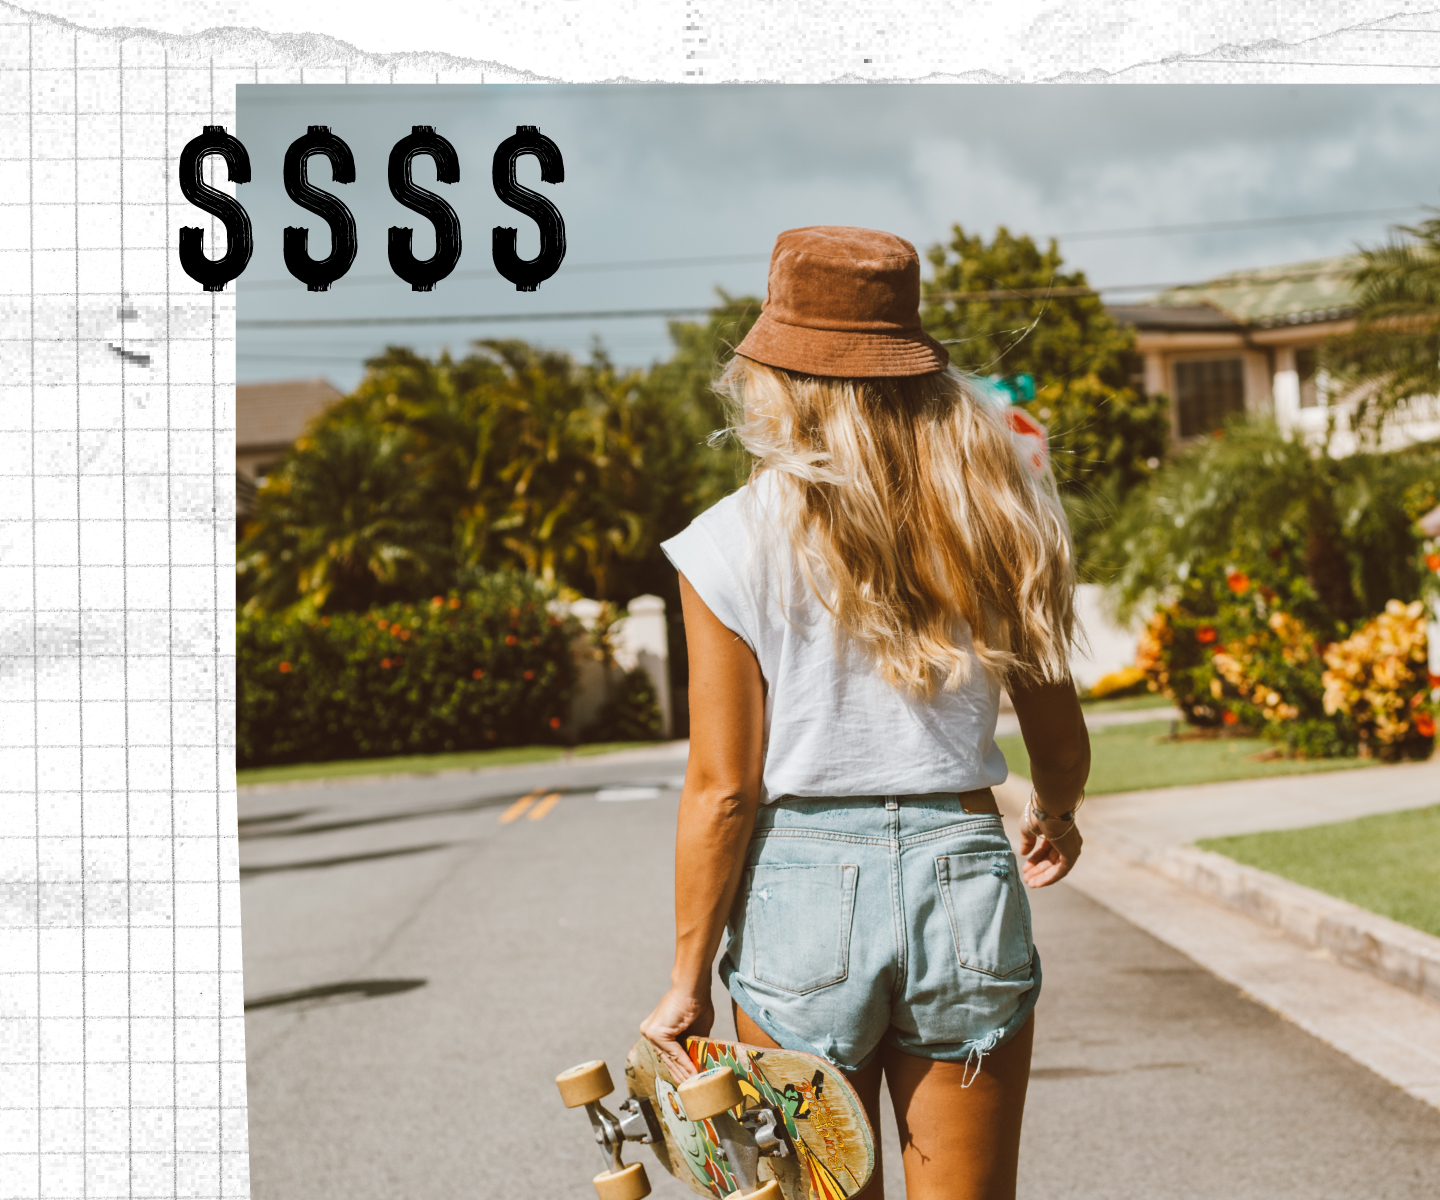 Get Paid Cash for your like-new summer styles!